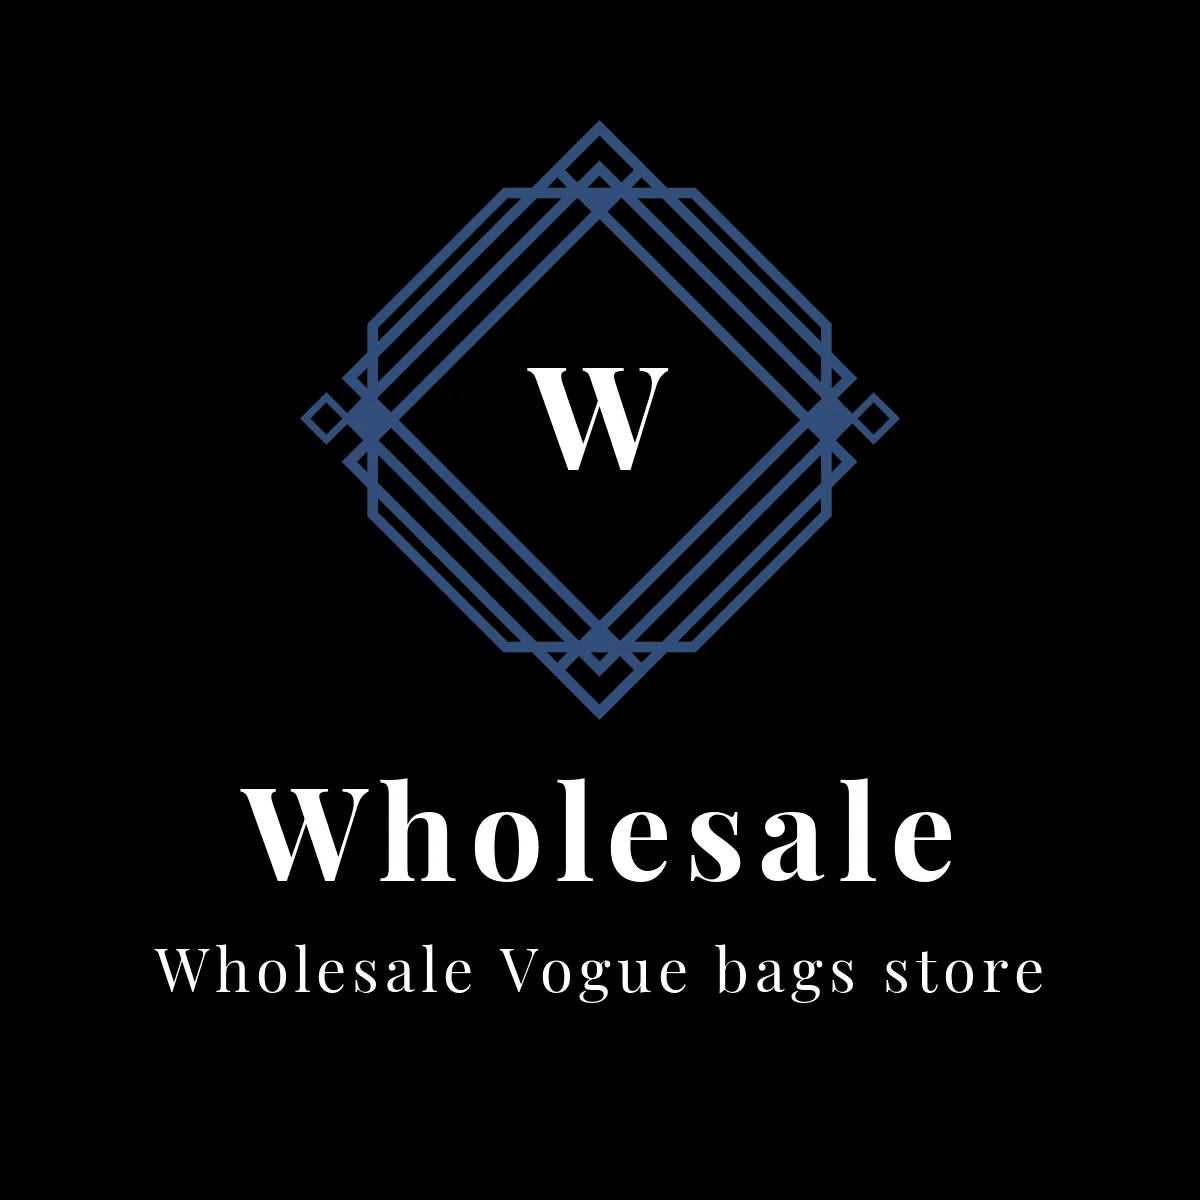 Wholesale High Quality Vogue Bags Store